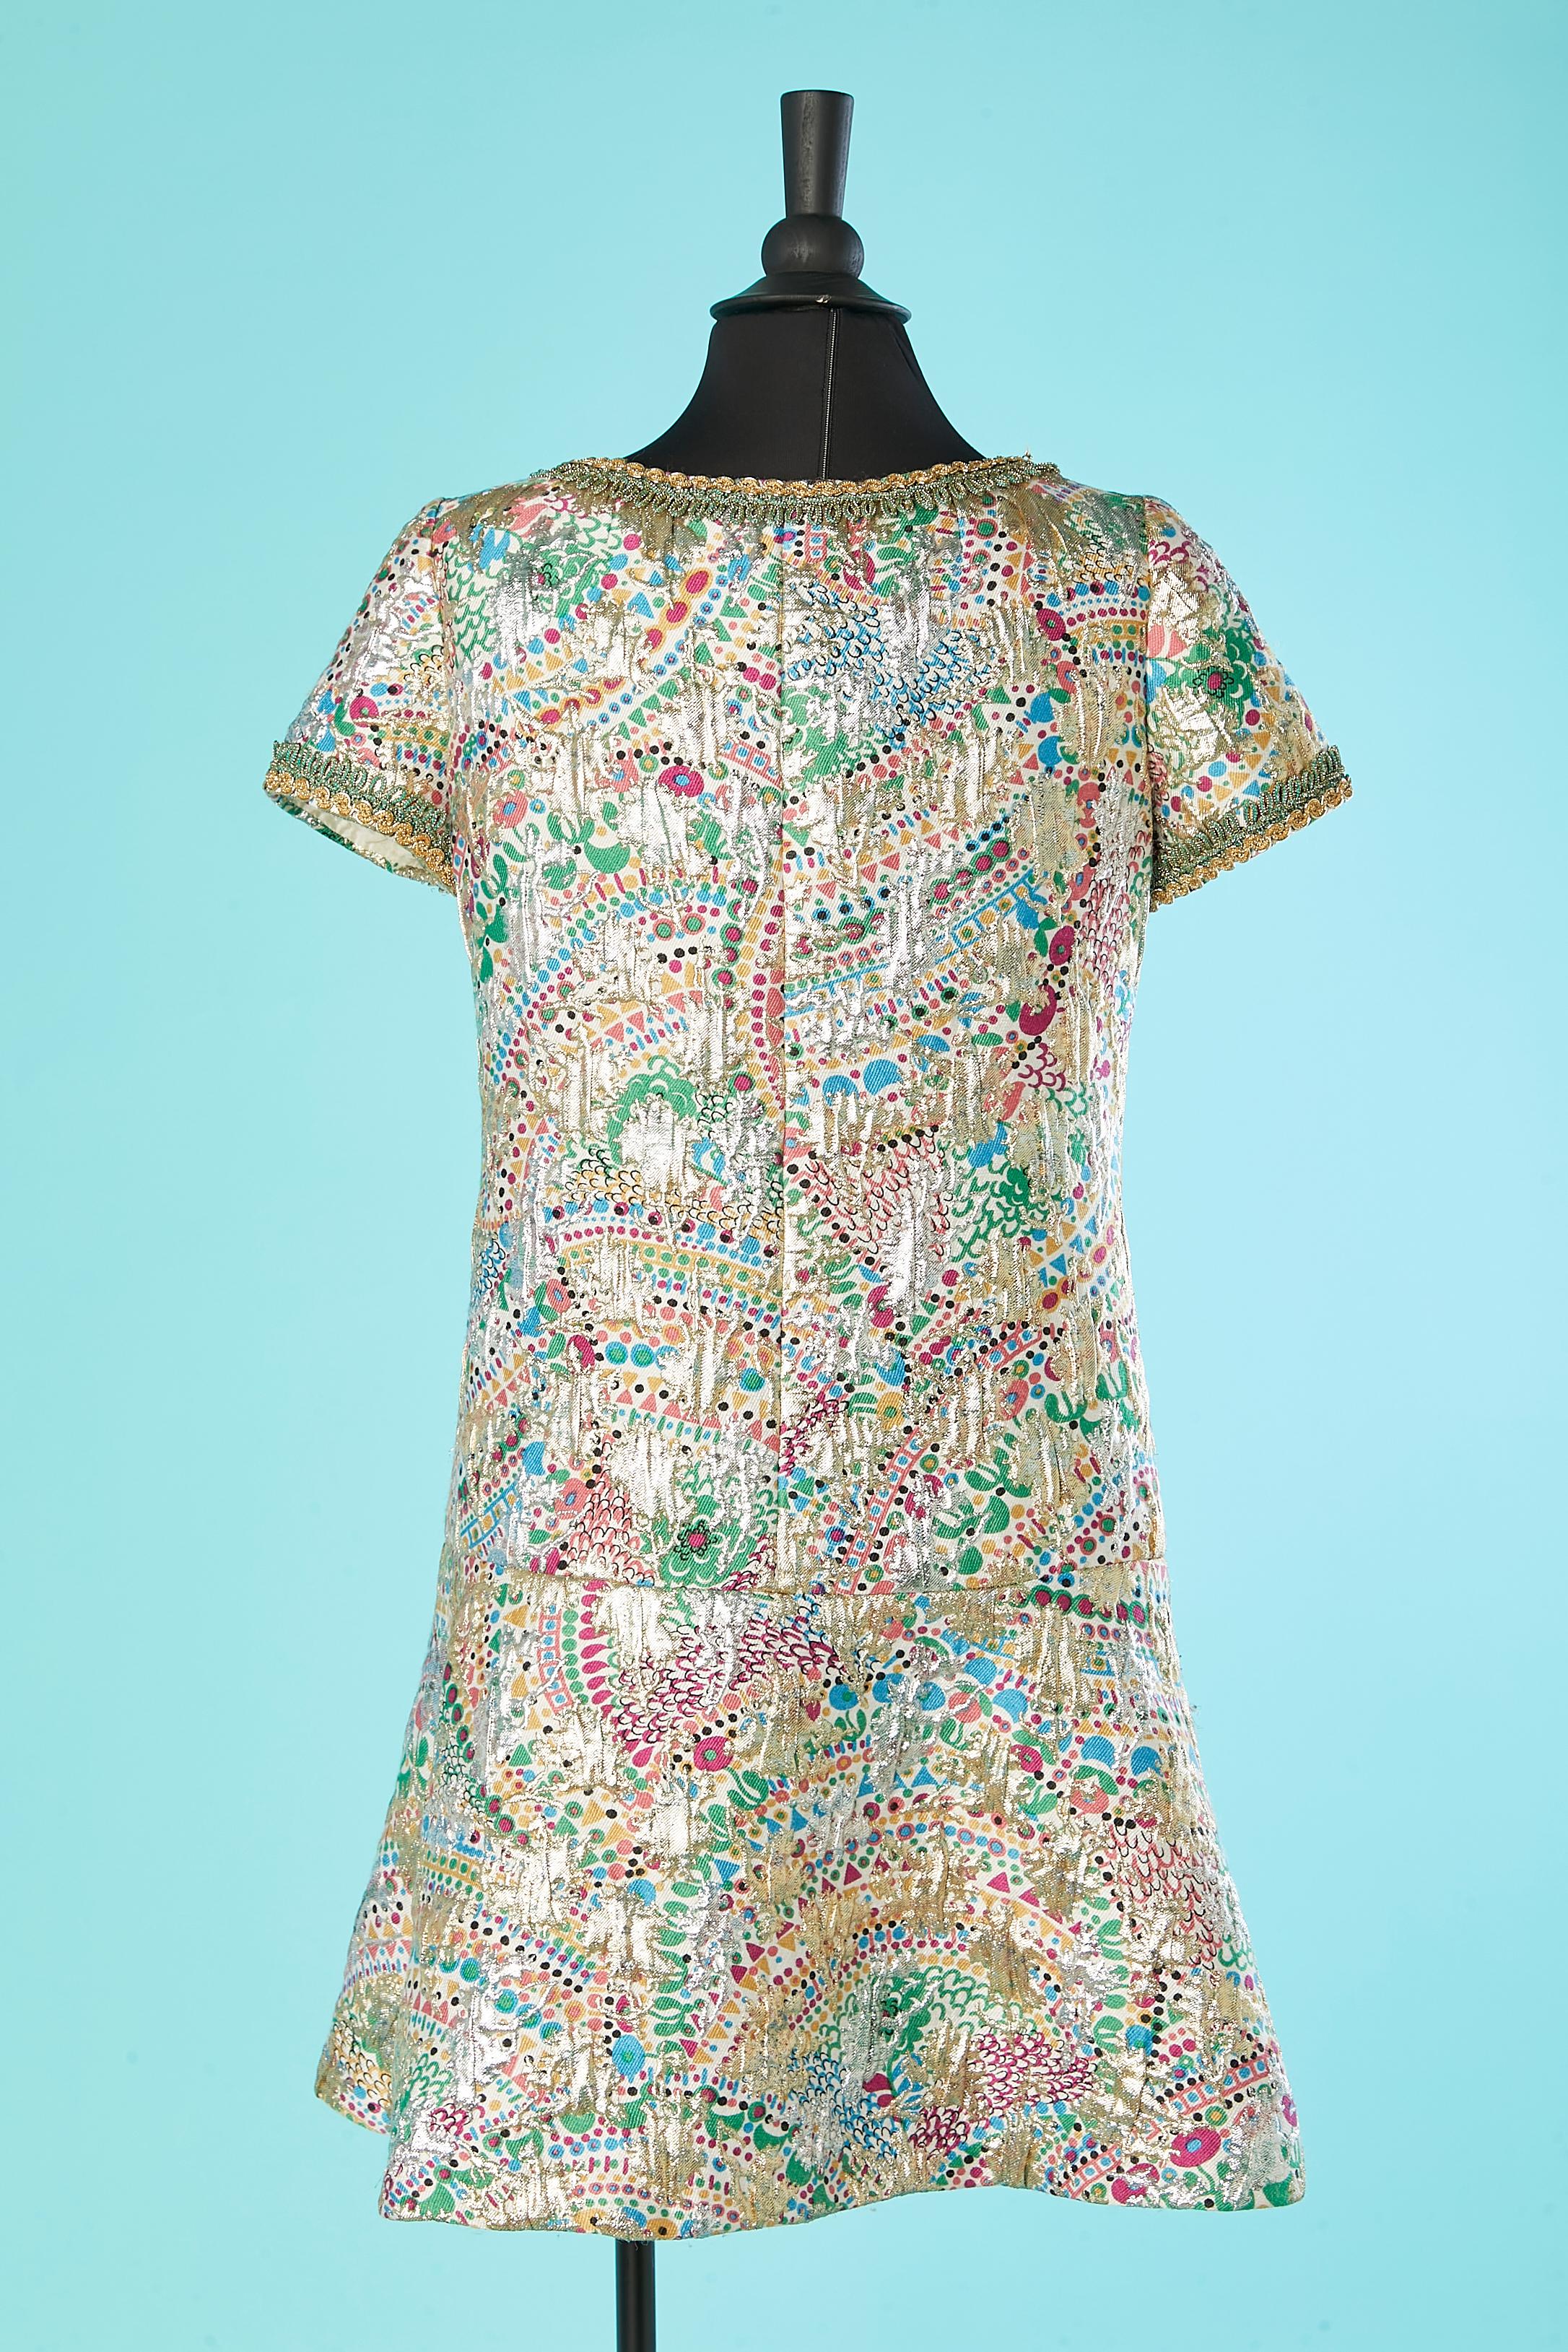 Printed cocktail dress in silver and gold brocade Lanvin Circa 1960's  For Sale 1